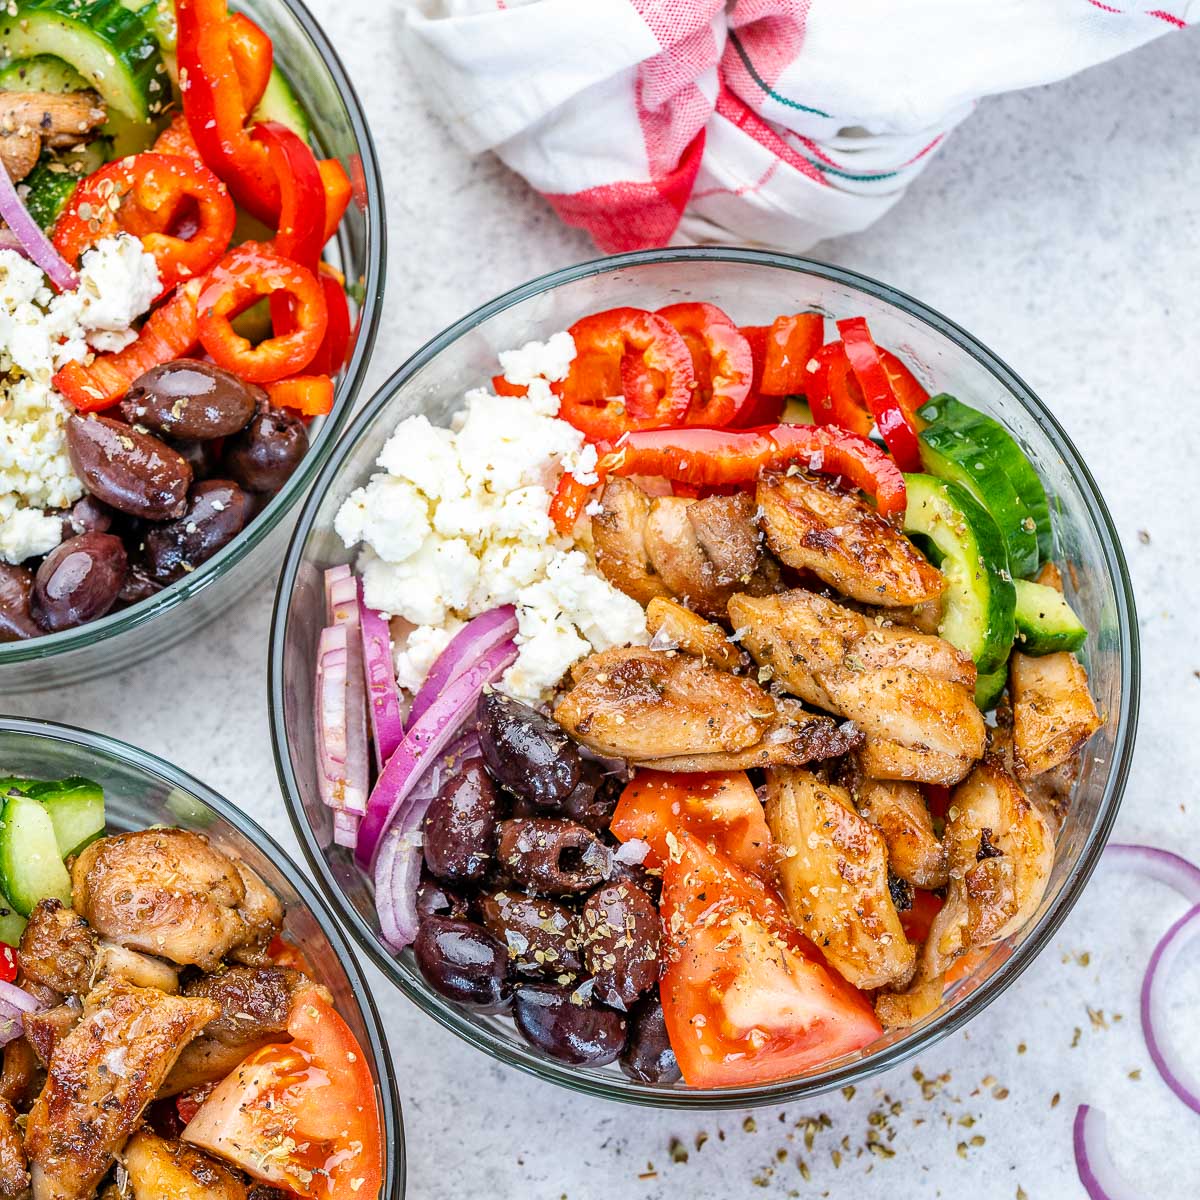 Greek Chicken Meal Prep Bowls - Cooks Well With Others